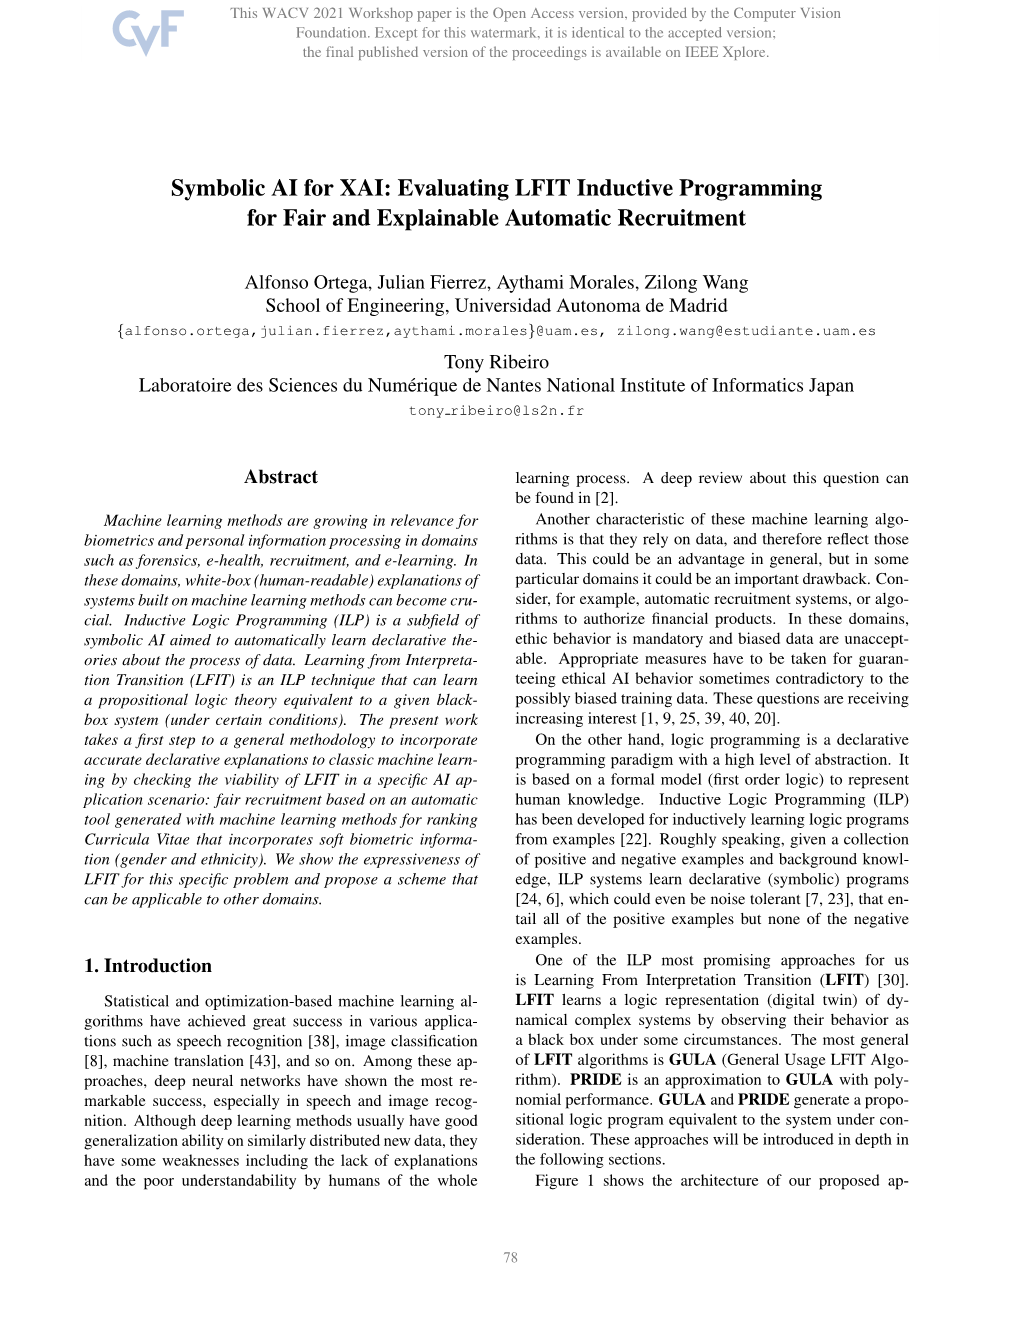 Symbolic AI for XAI: Evaluating LFIT Inductive Programming for Fair and Explainable Automatic Recruitment